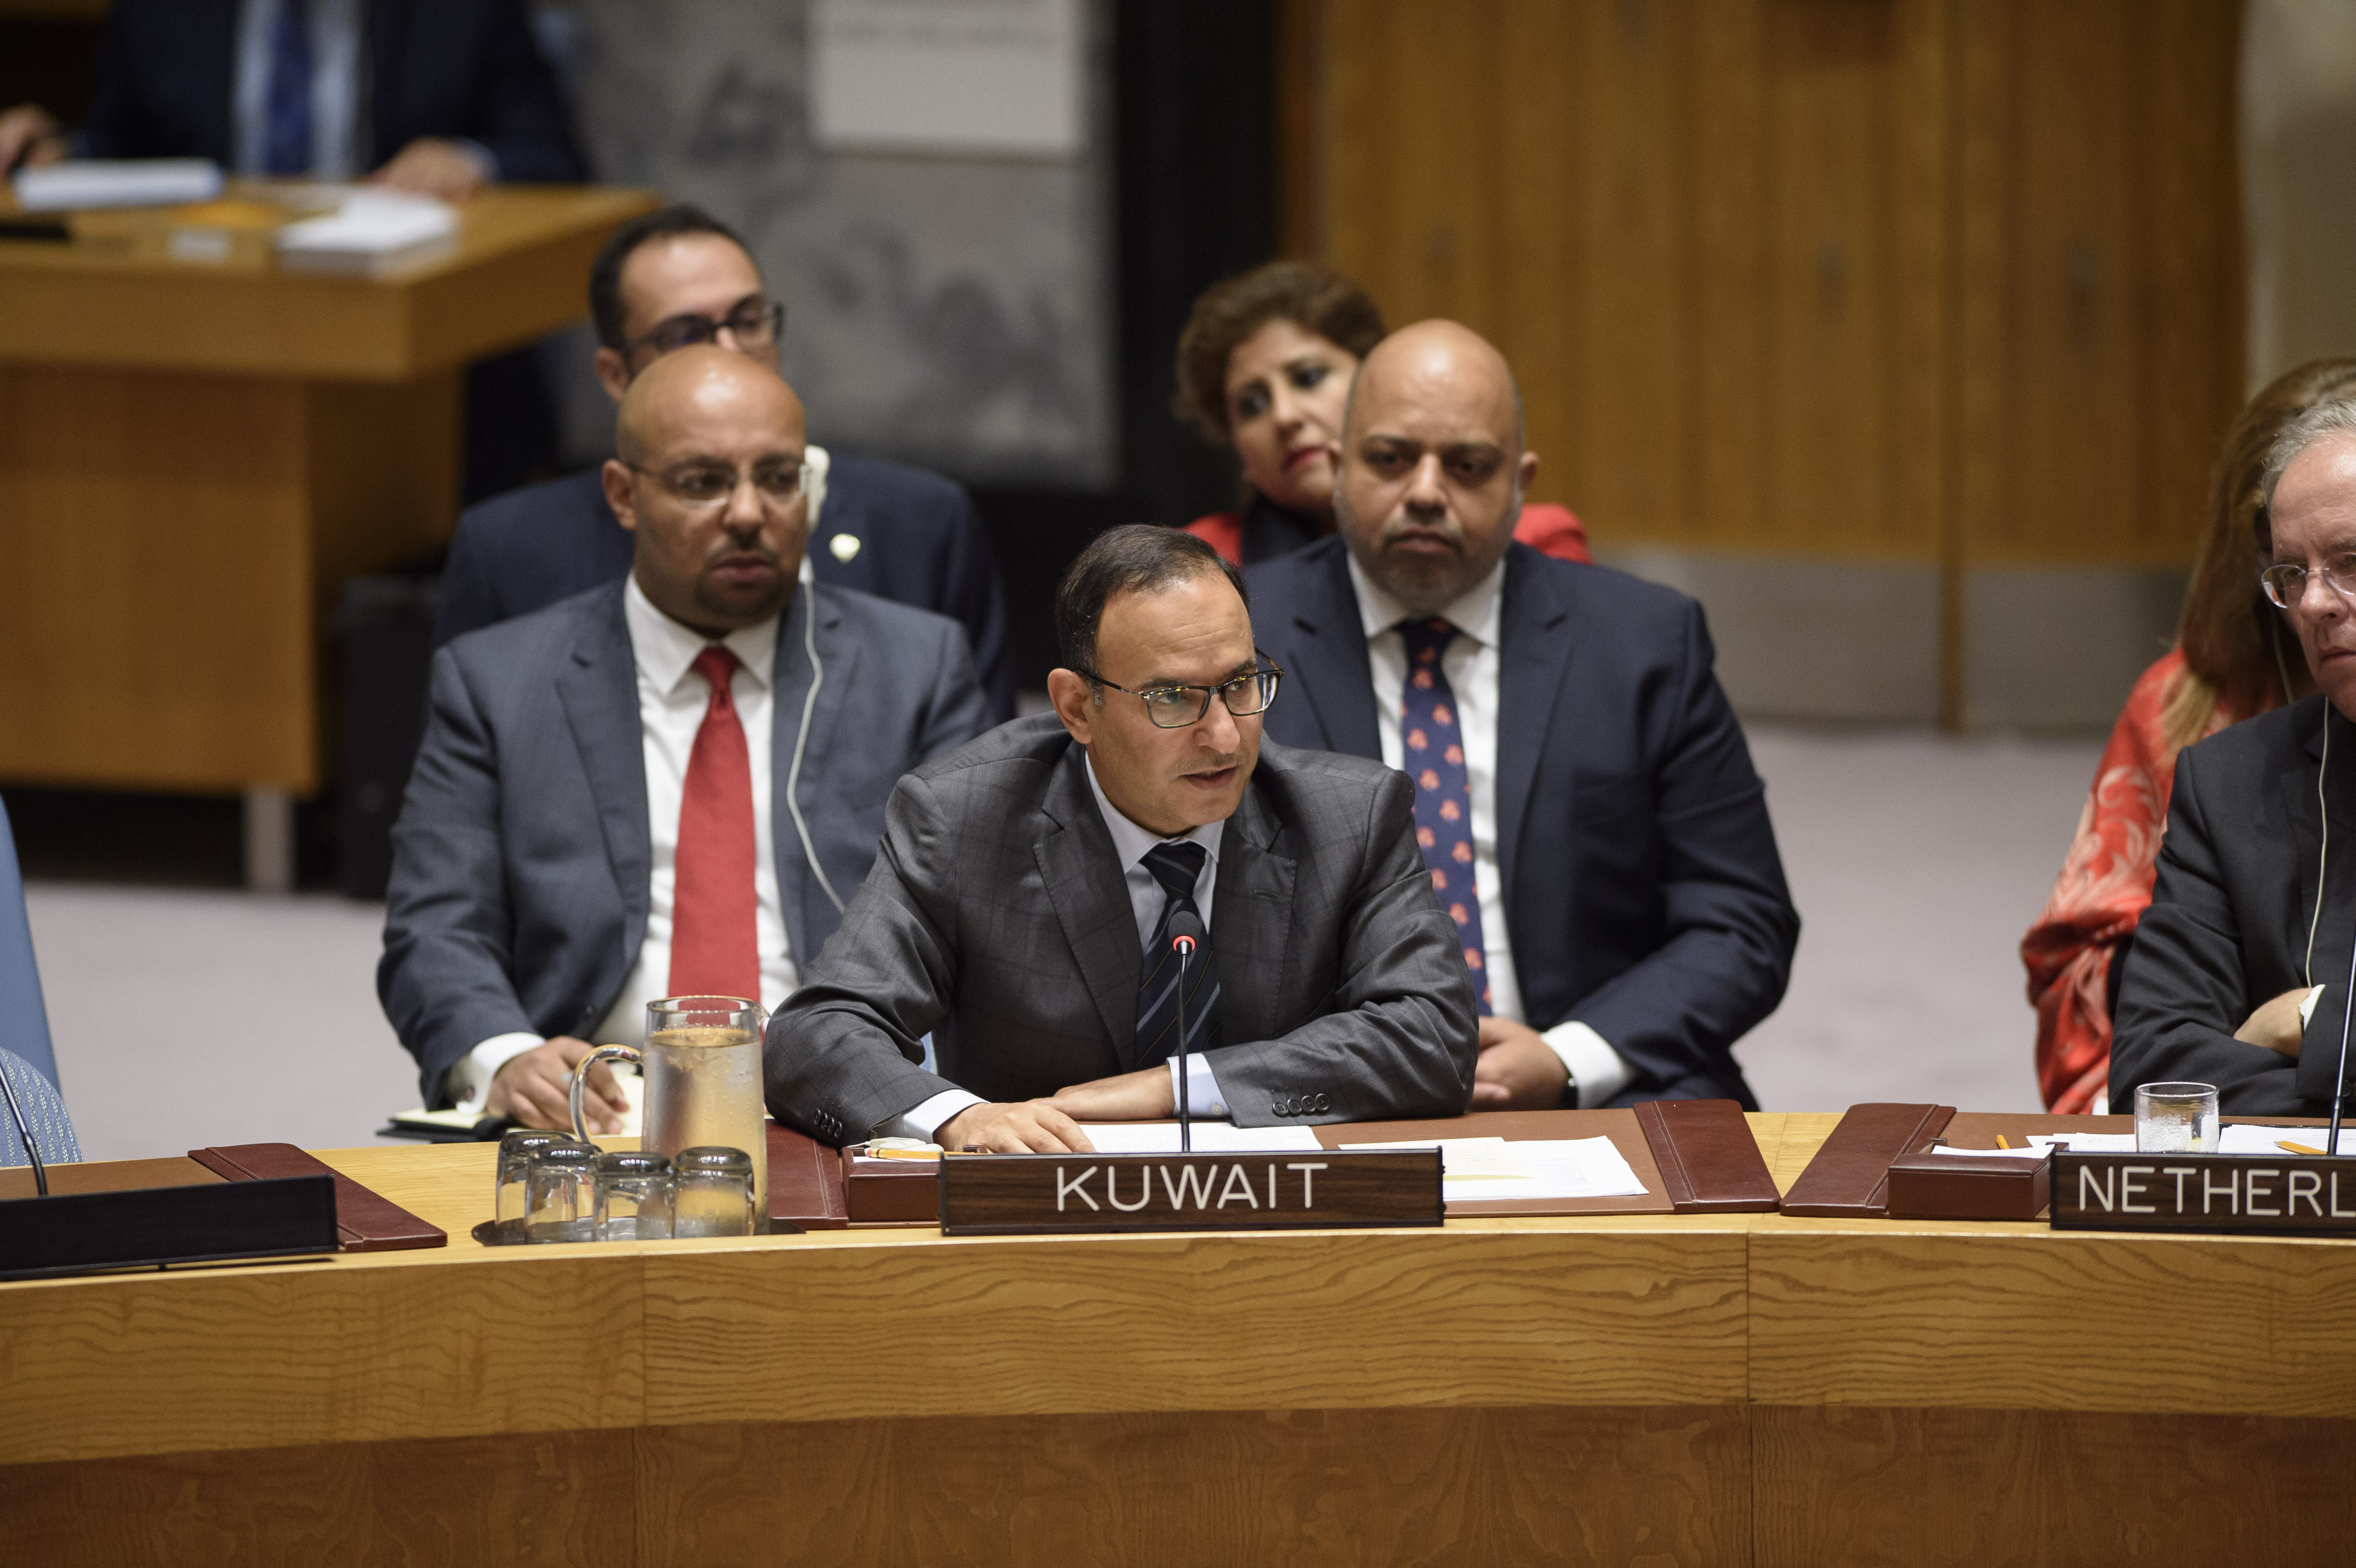 Kuwait's Permanent Representative to UN Ambassador Mansour Al-Otaibi giving Kuwait's speech before the United Nations' session on Syria